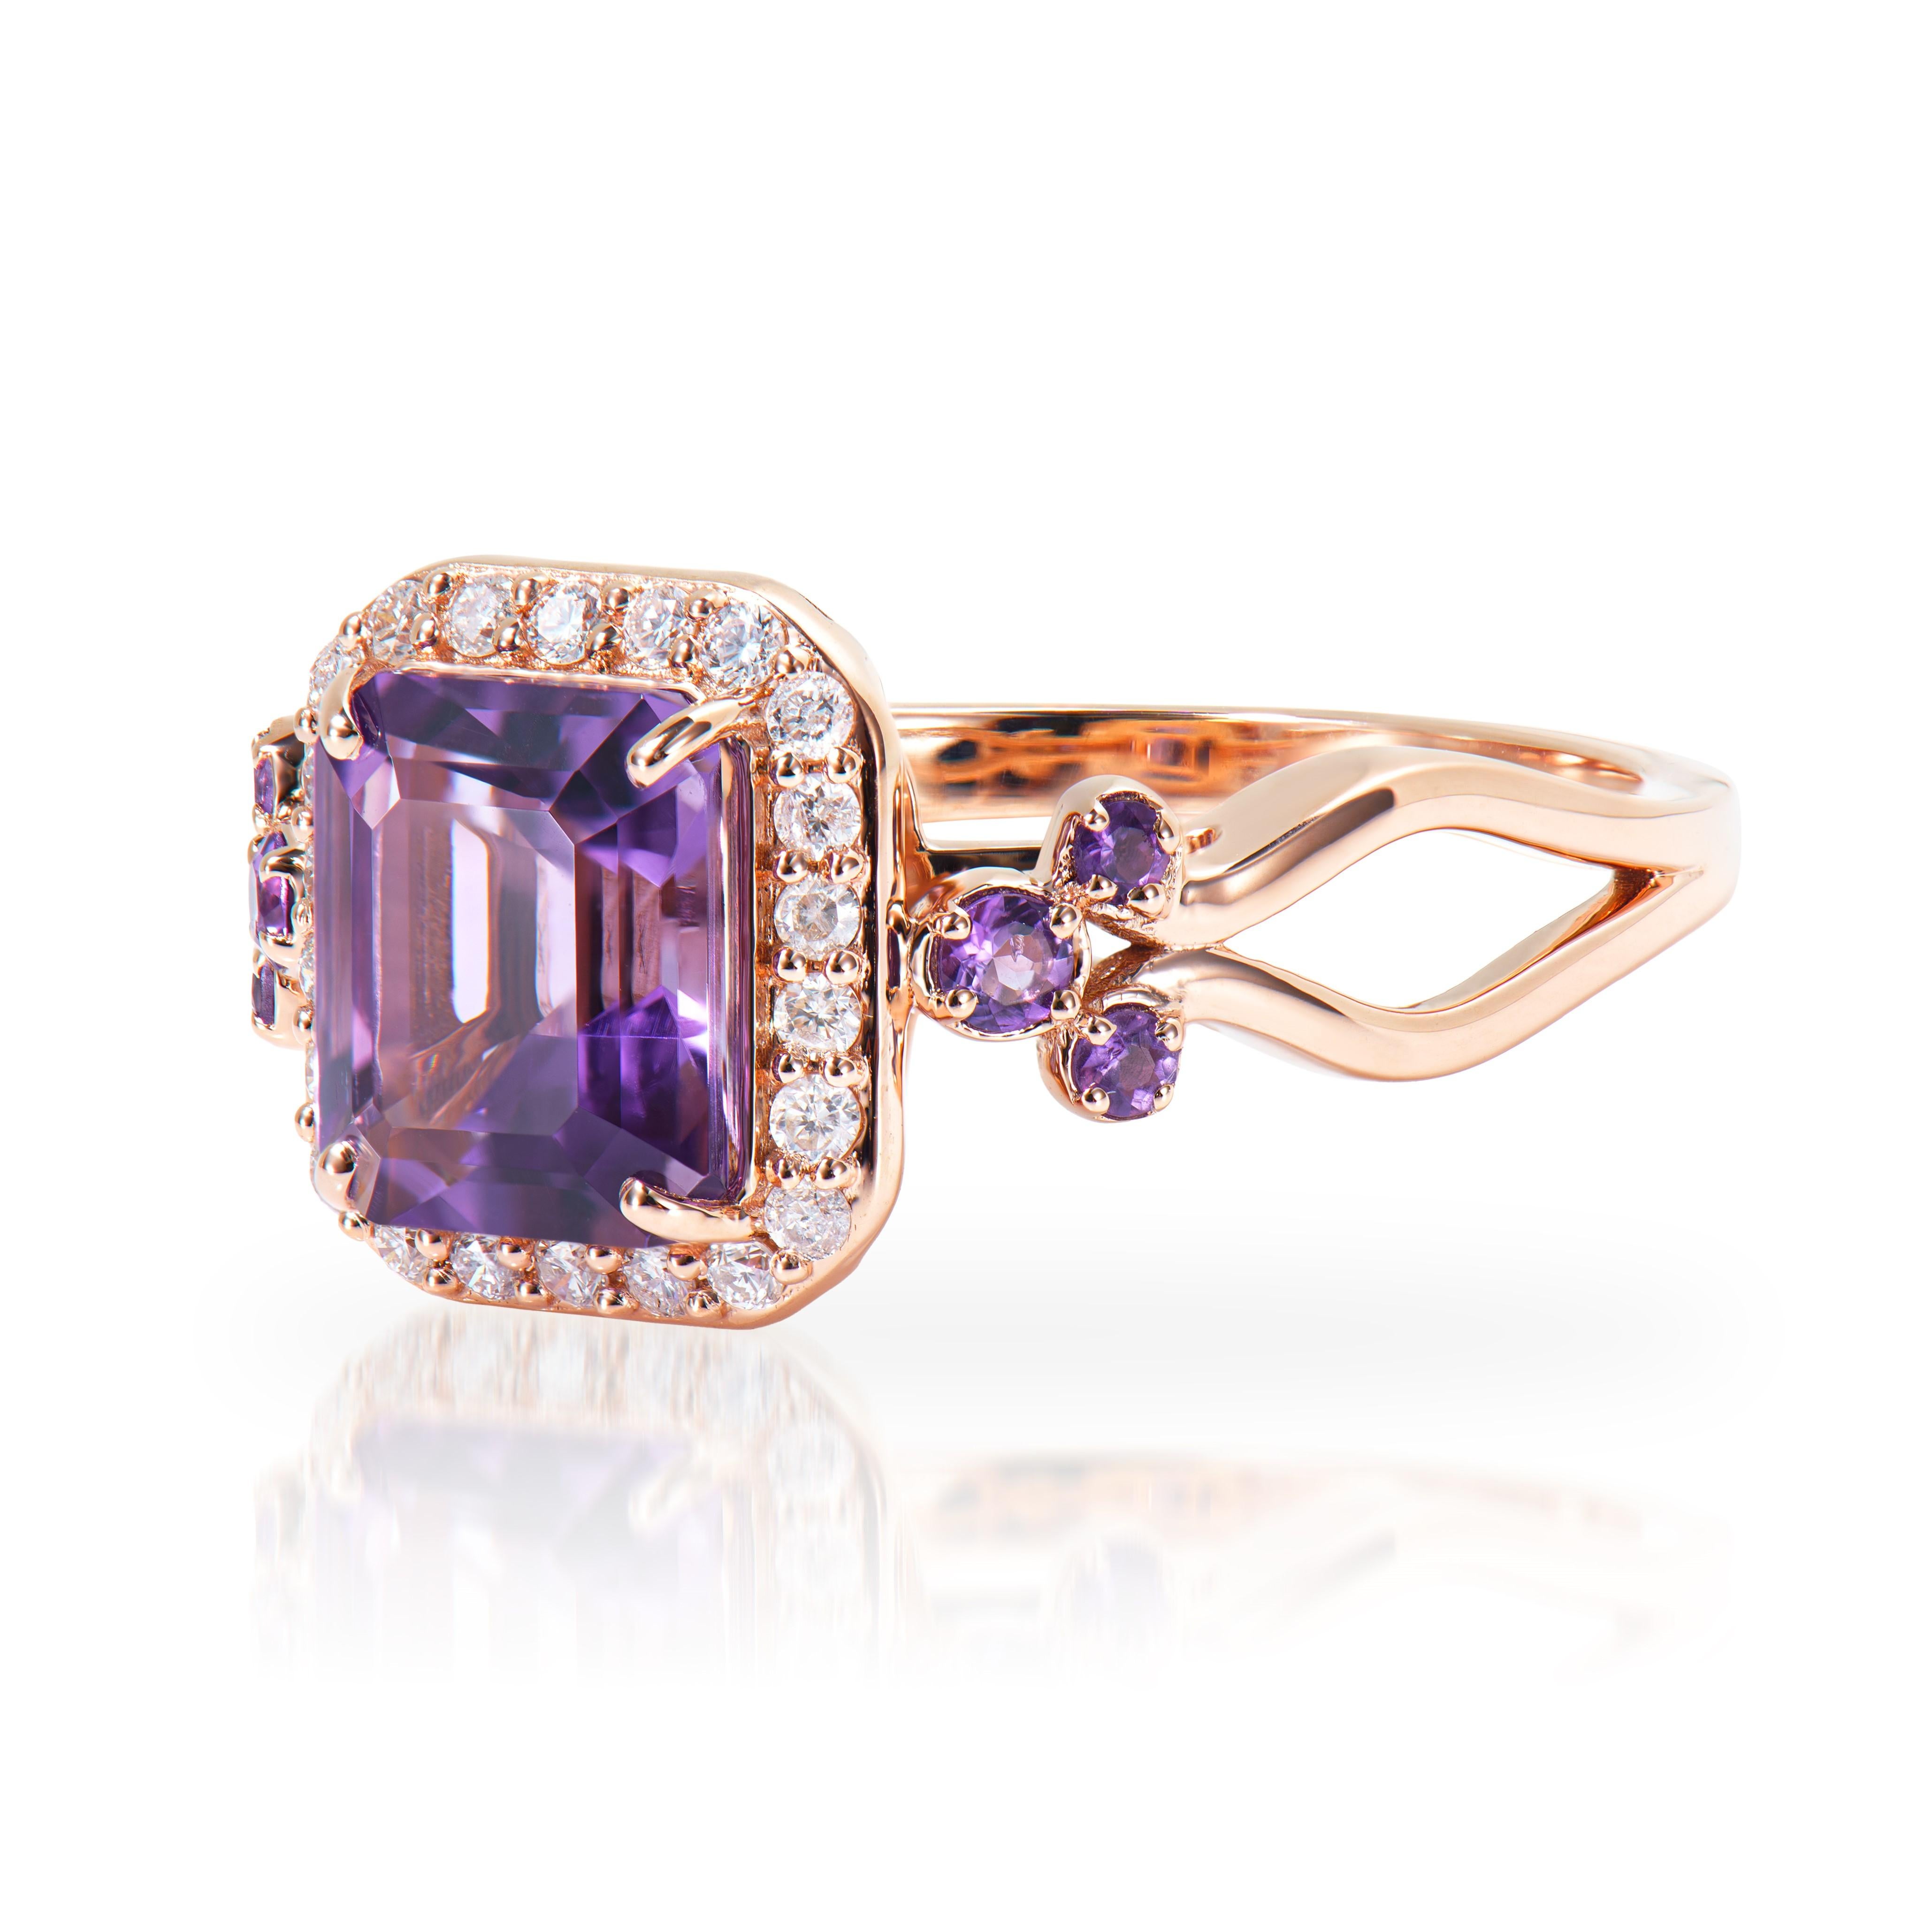 Octagon Cut 1.78 Carat Amethyst Fancy Ring in 14Karat Rose Gold with White Diamond.   For Sale